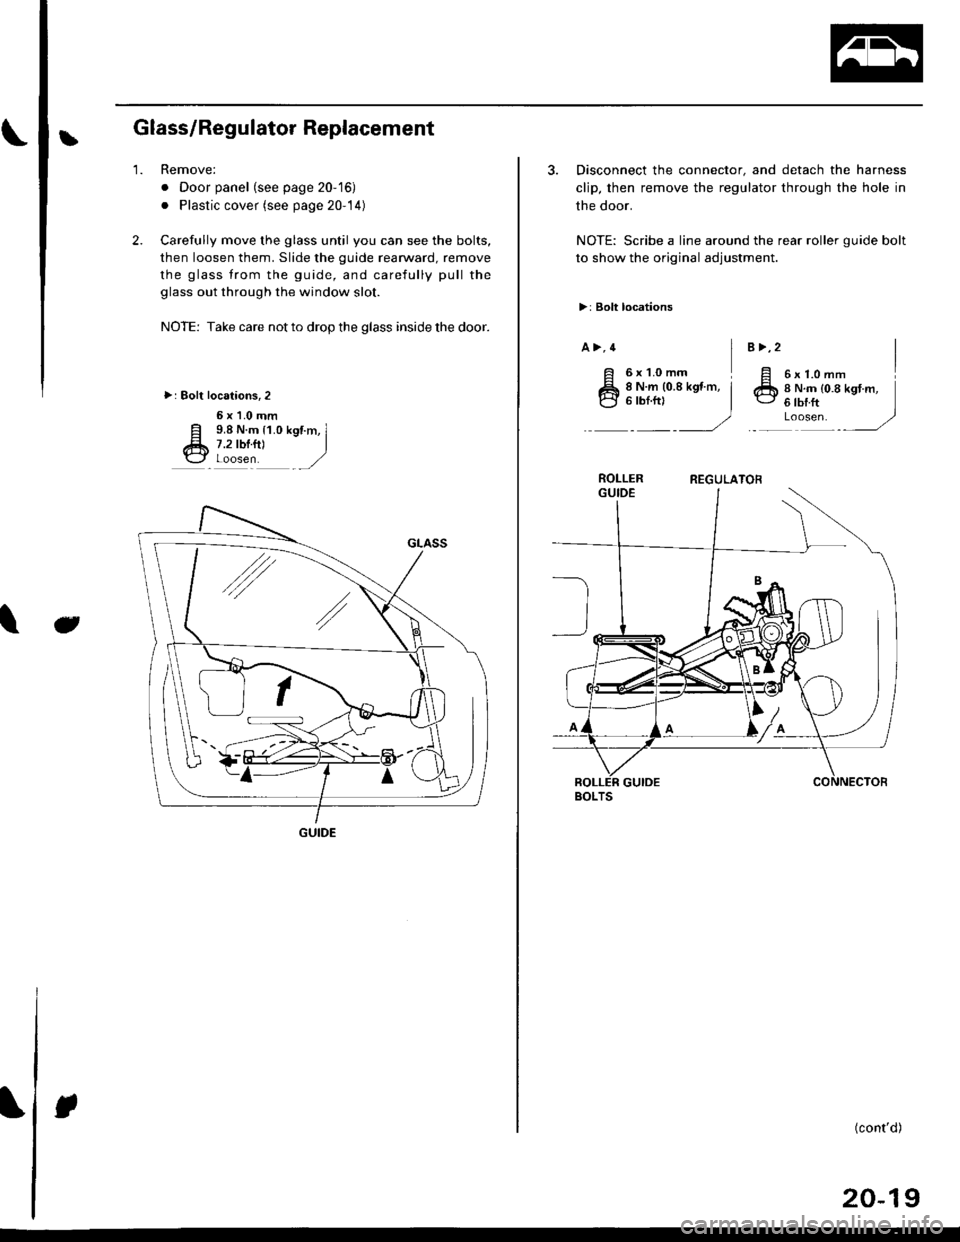 HONDA CIVIC 2000 6.G Workshop Manual LGlass/Regulator Replacement
2.
1.Remove:
. Door panel (see page 20-16)
. Plastic cover (see page 20-14)
Carefully move the glass until you can see the bolts,
then loosen them. Slide the guide rearwa